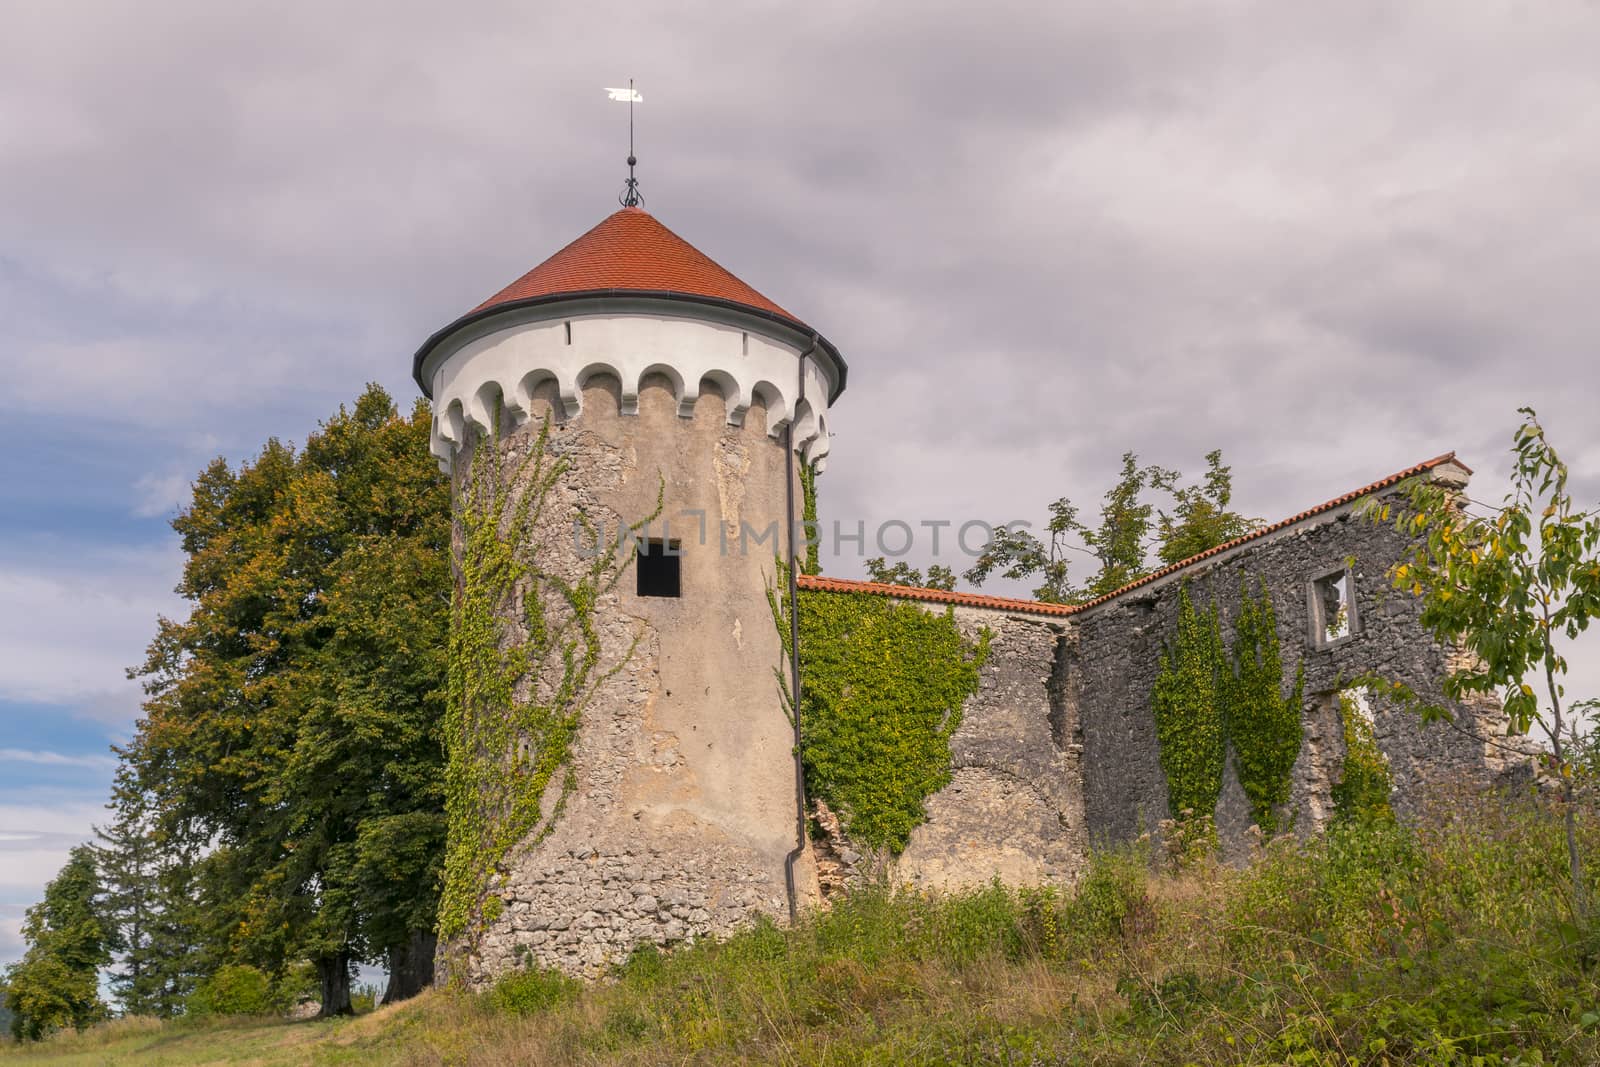 Watchtower and medieval ruins of Kalc (Kalec) castle, Pivka, Slovenia. The castle was built around 1620, today only the tower and ruins of an outbuilding remain.